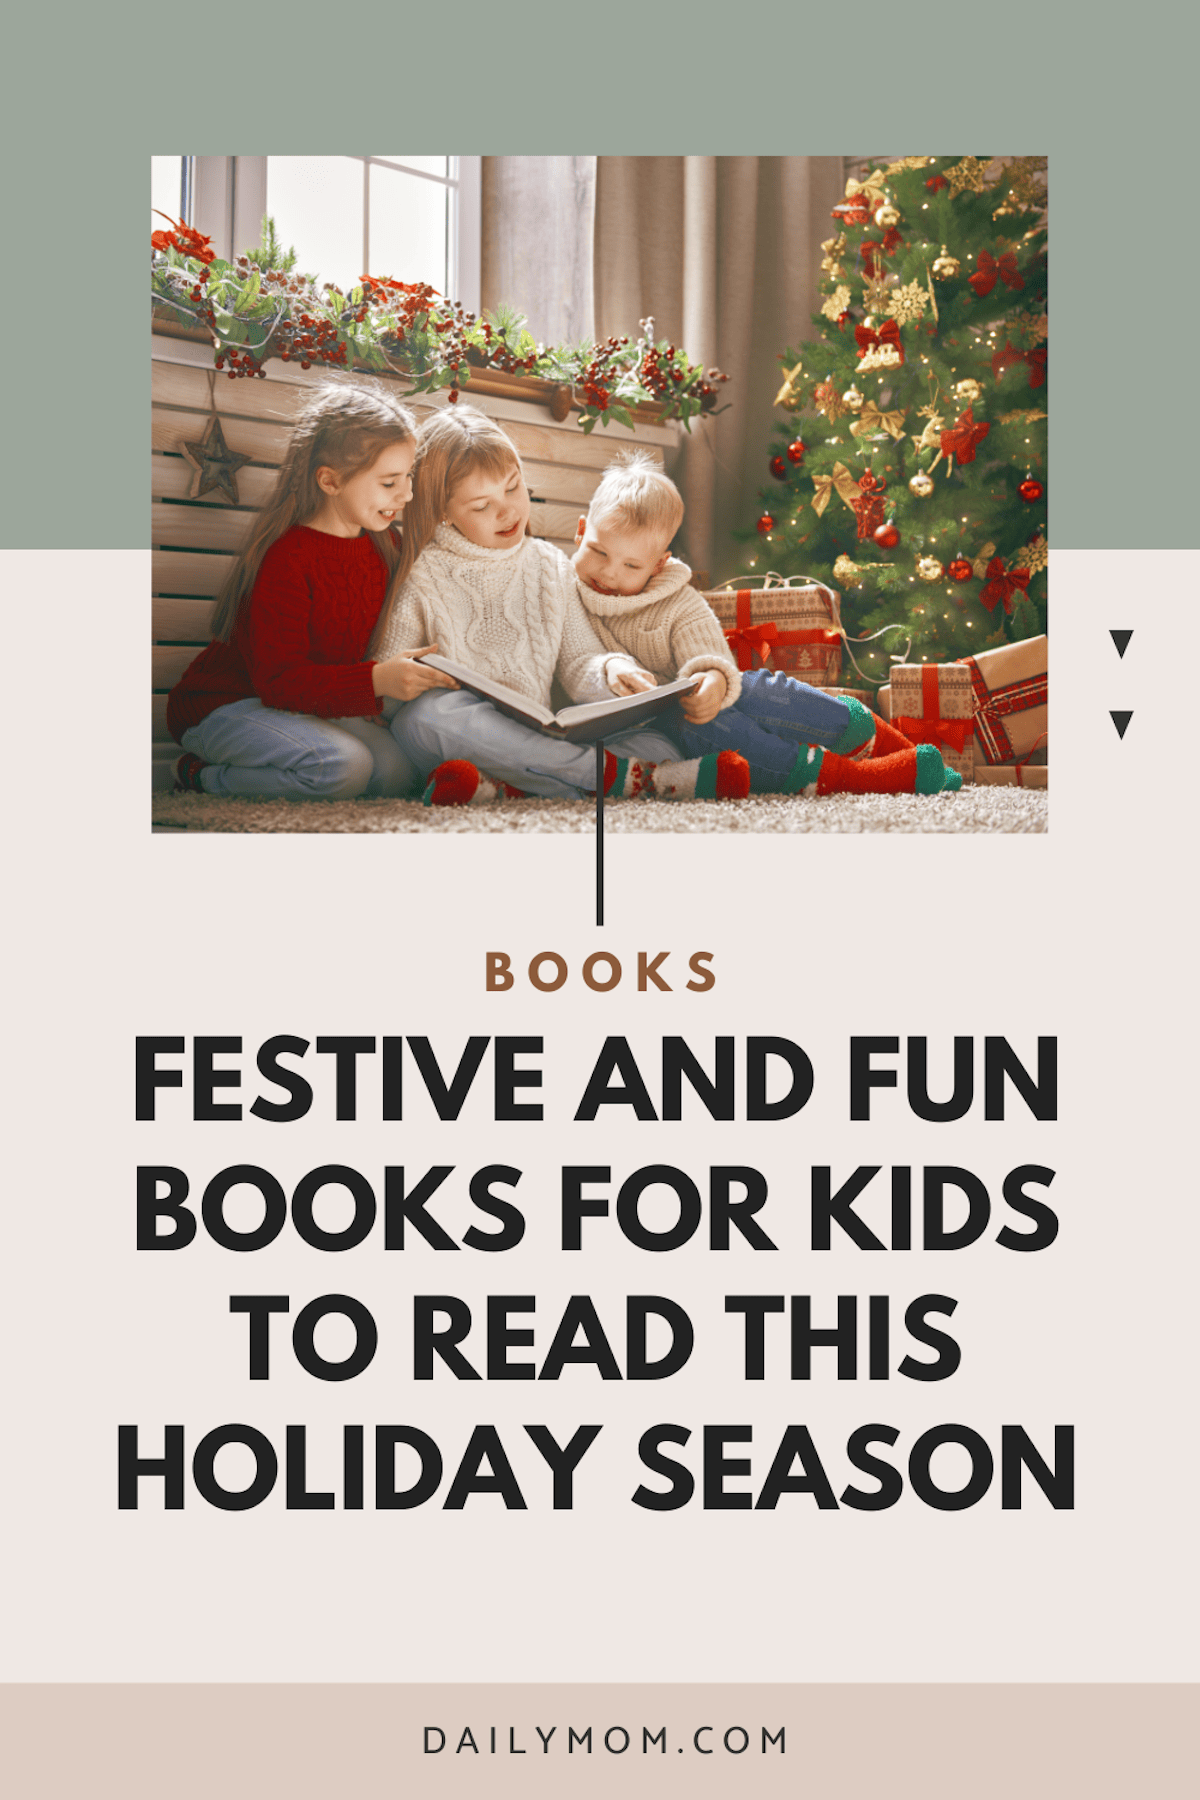 25 Festive And Fun Books For Kids To Read This Holiday Season 3 Daily Mom, Magazine For Families